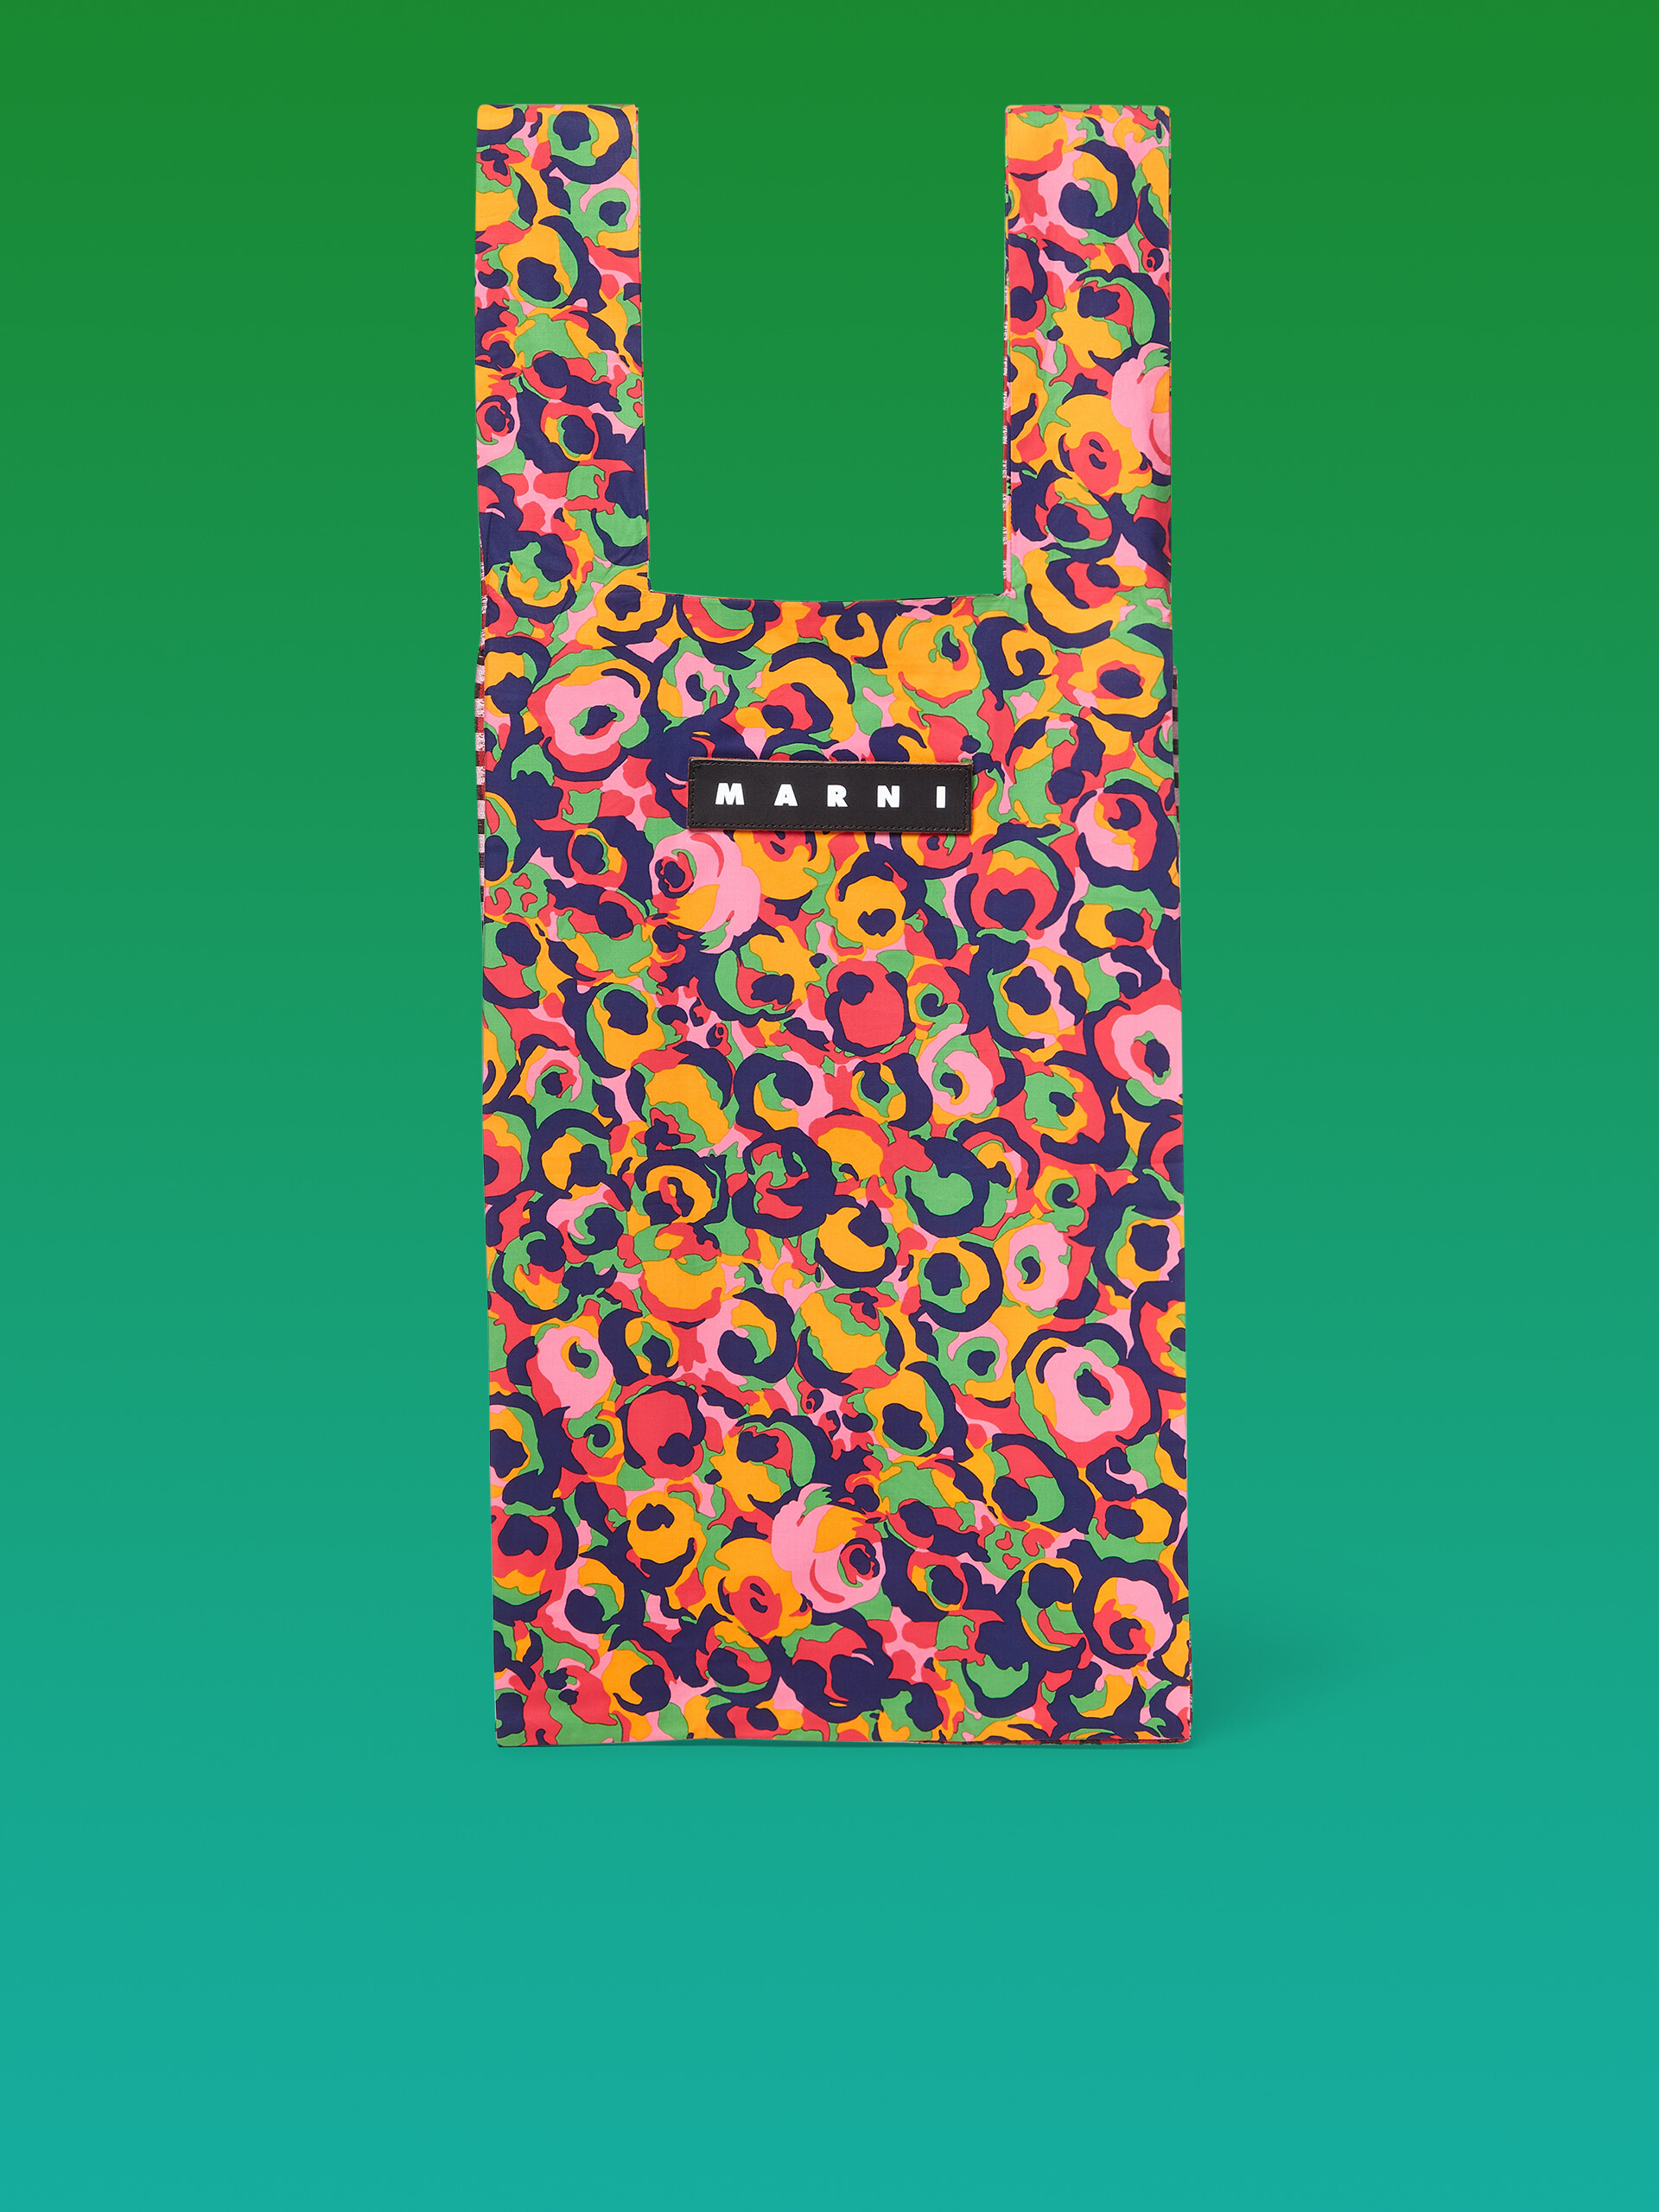 MARNI MARKET TOTE cotton shopping bag with floral and check print - Shopping Bags - Image 1